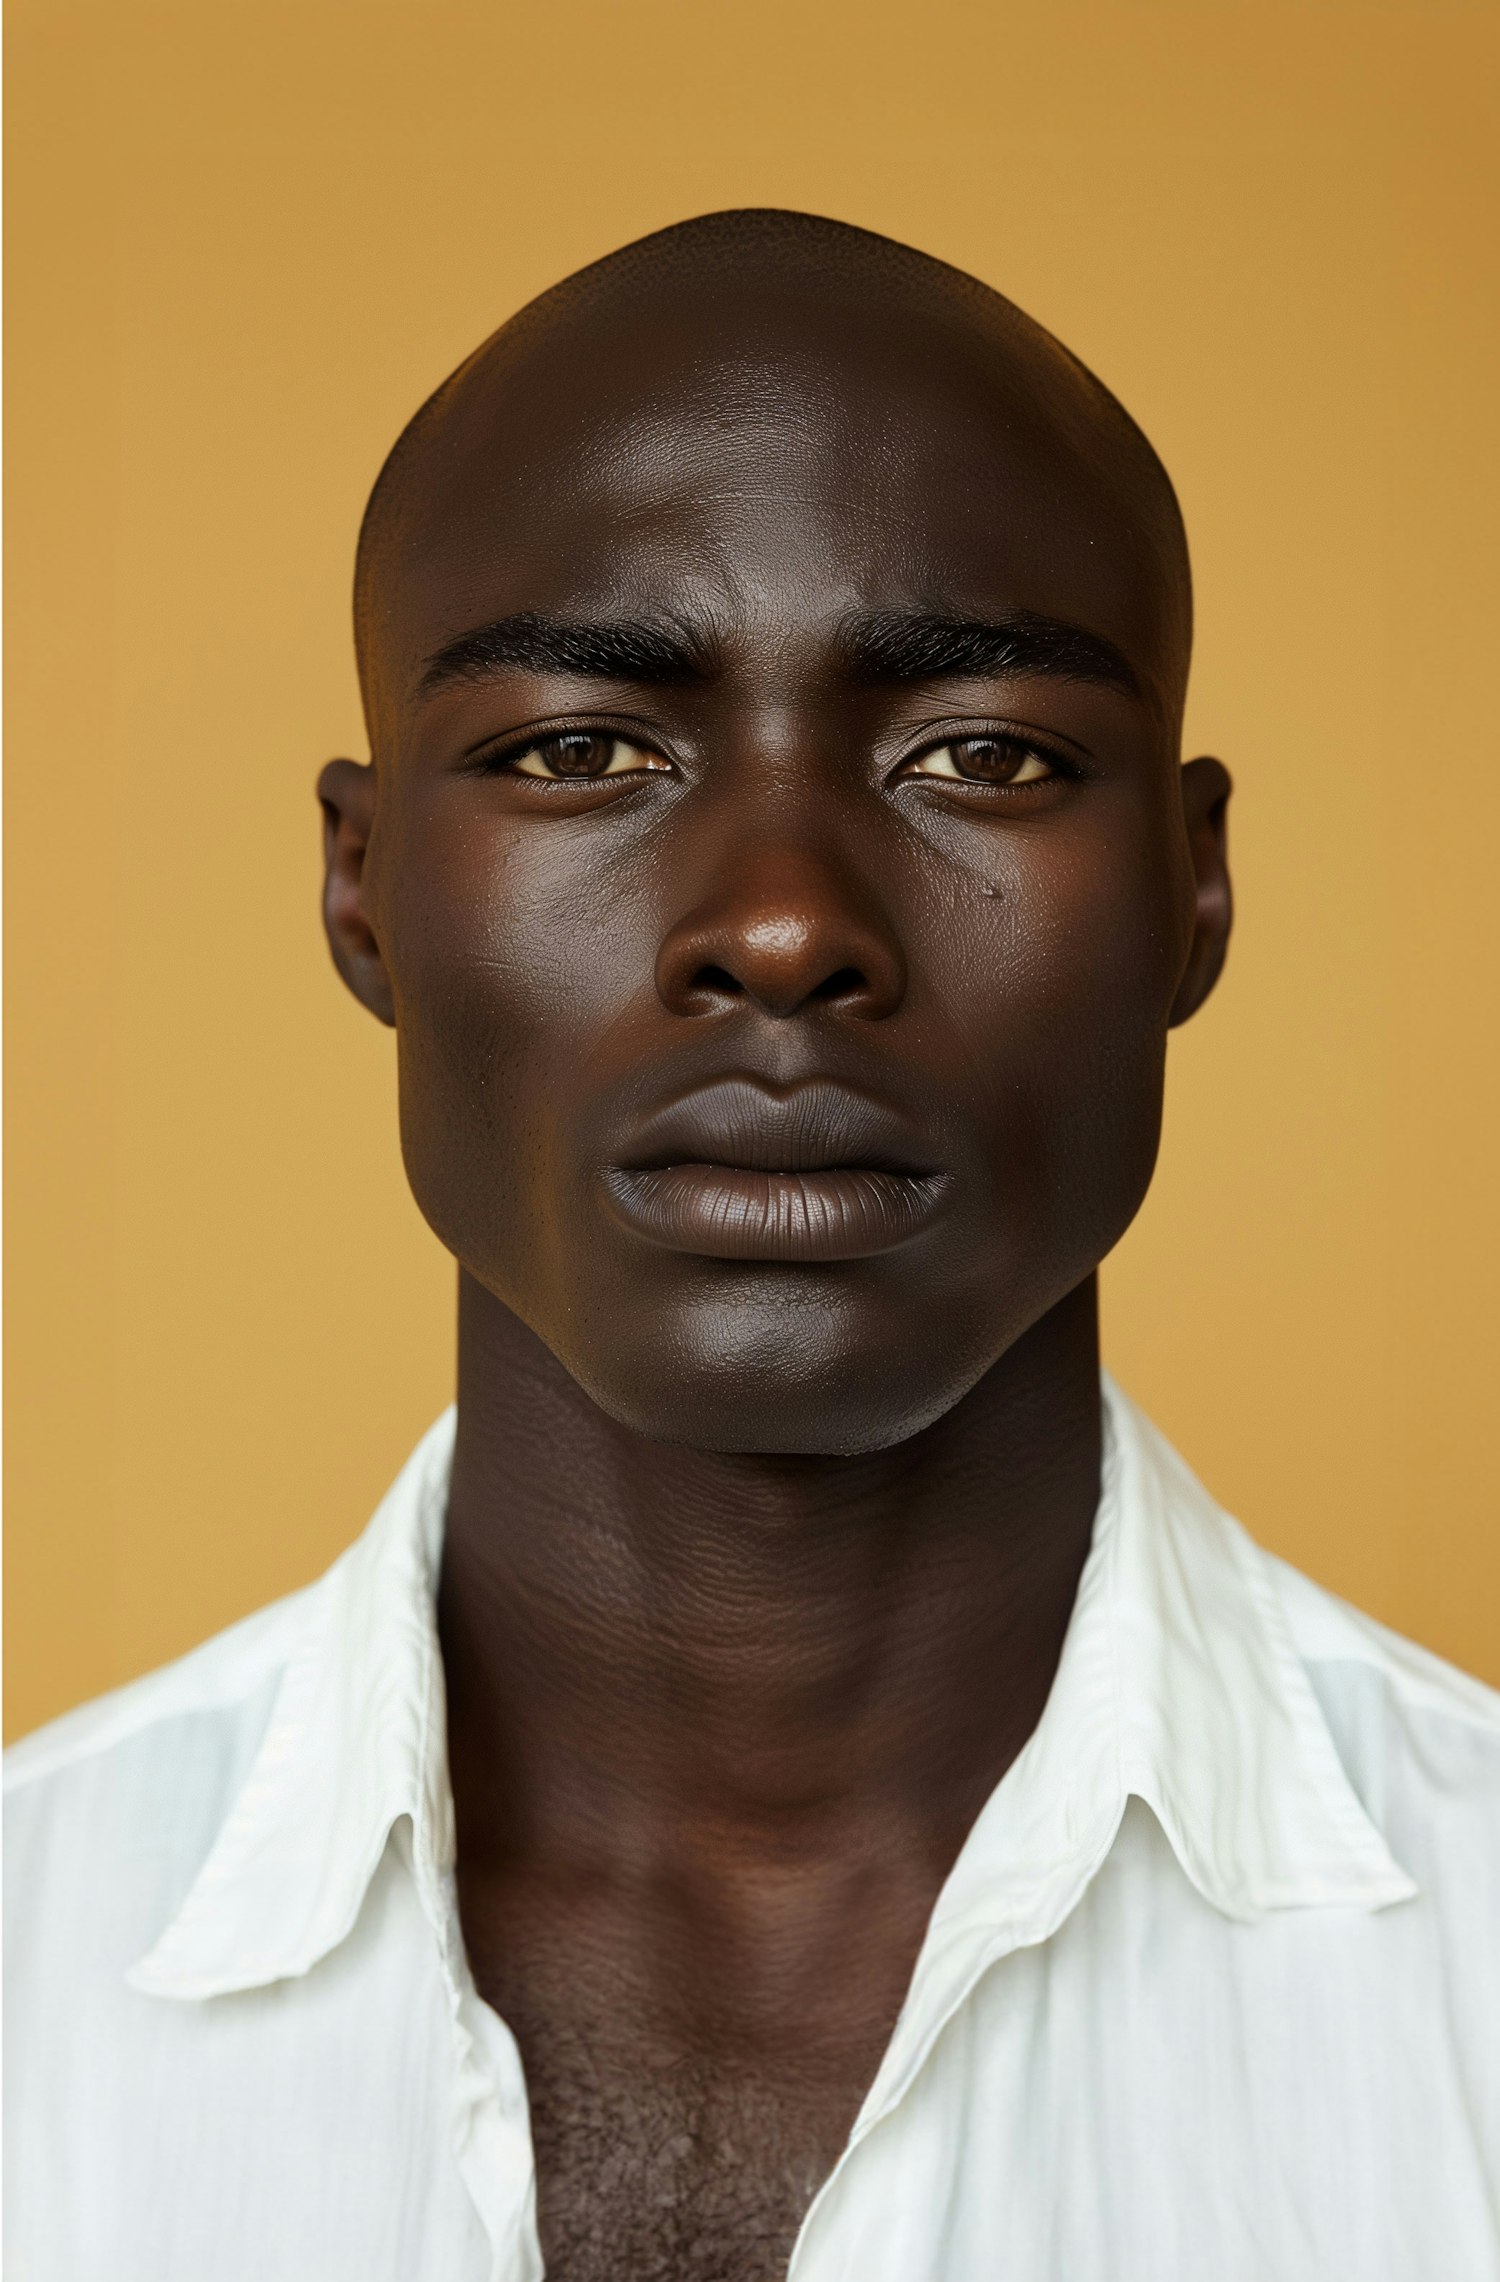 Portrait of a Black man with Intense Expression